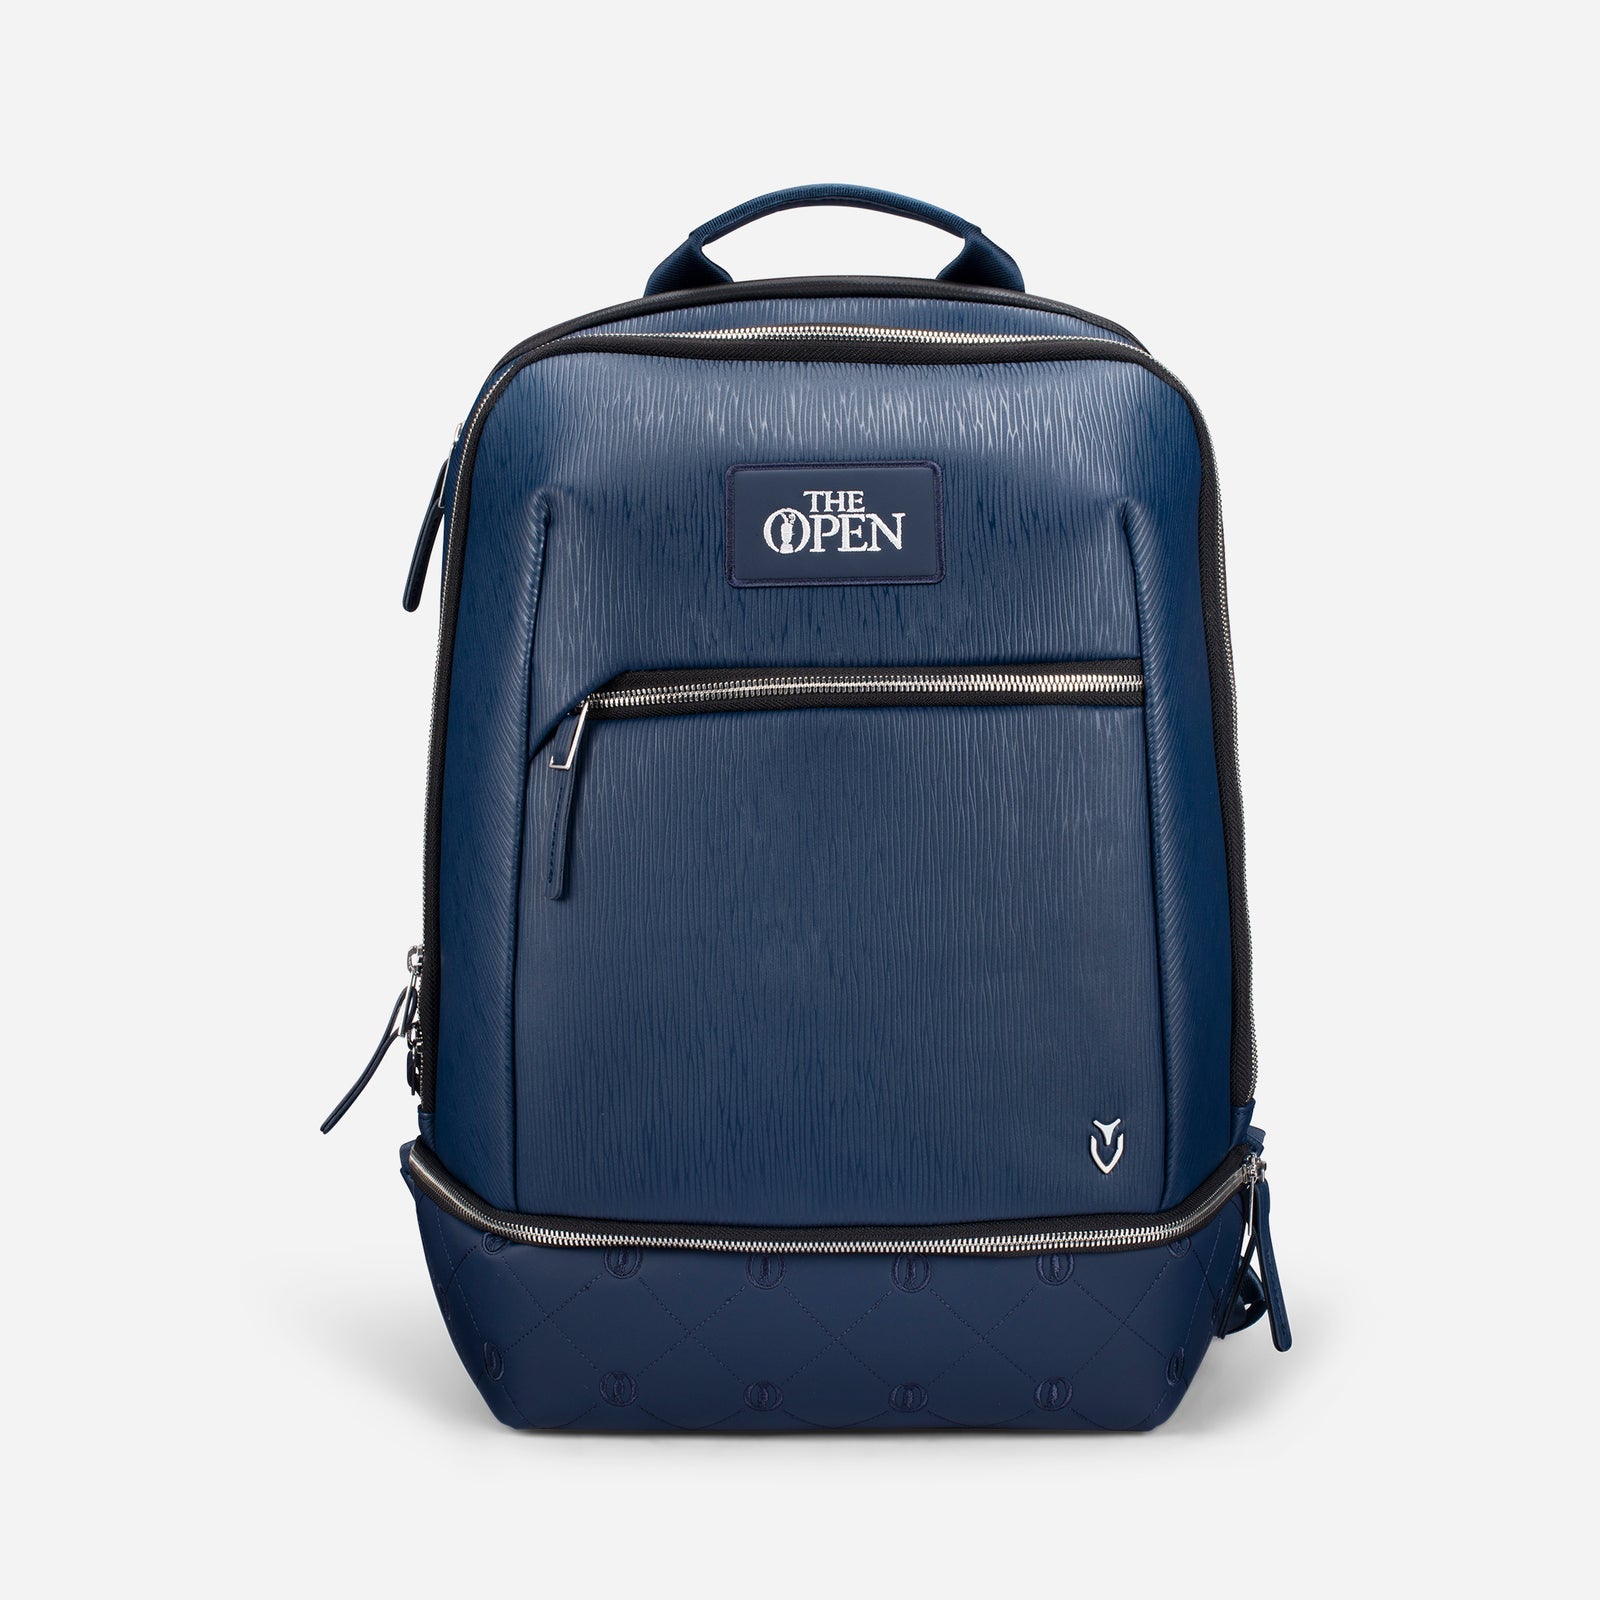 The Open x VESSEL Signature Backpack